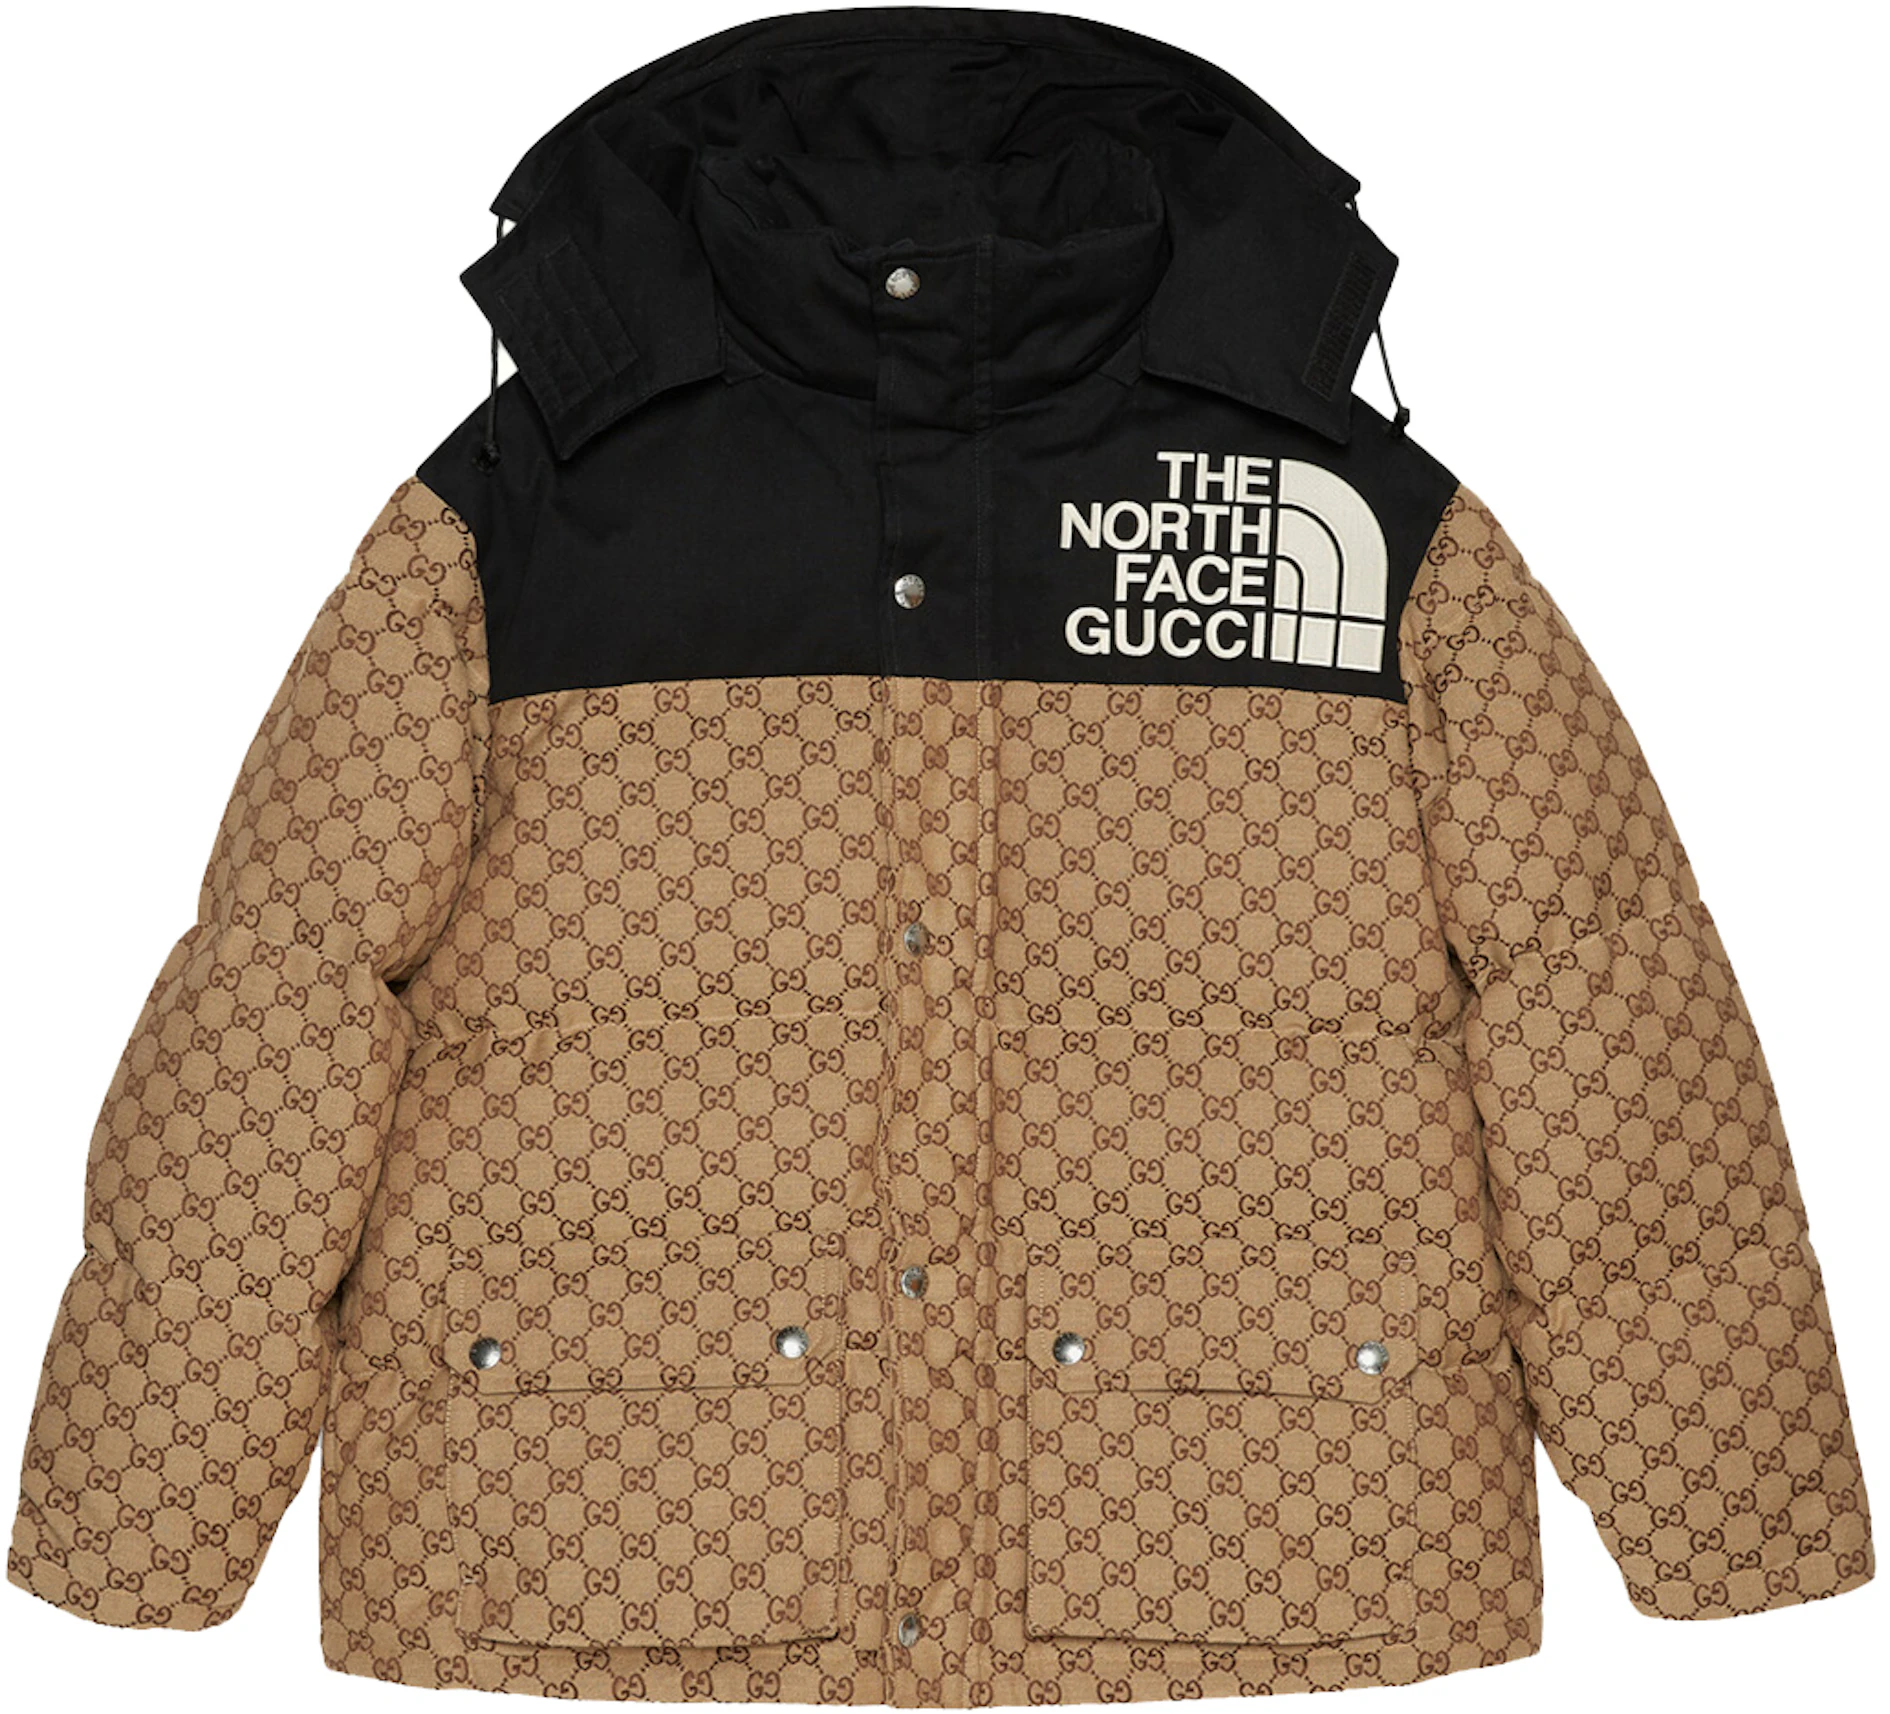 Top 62+ imagen north face gucci puffer jacket